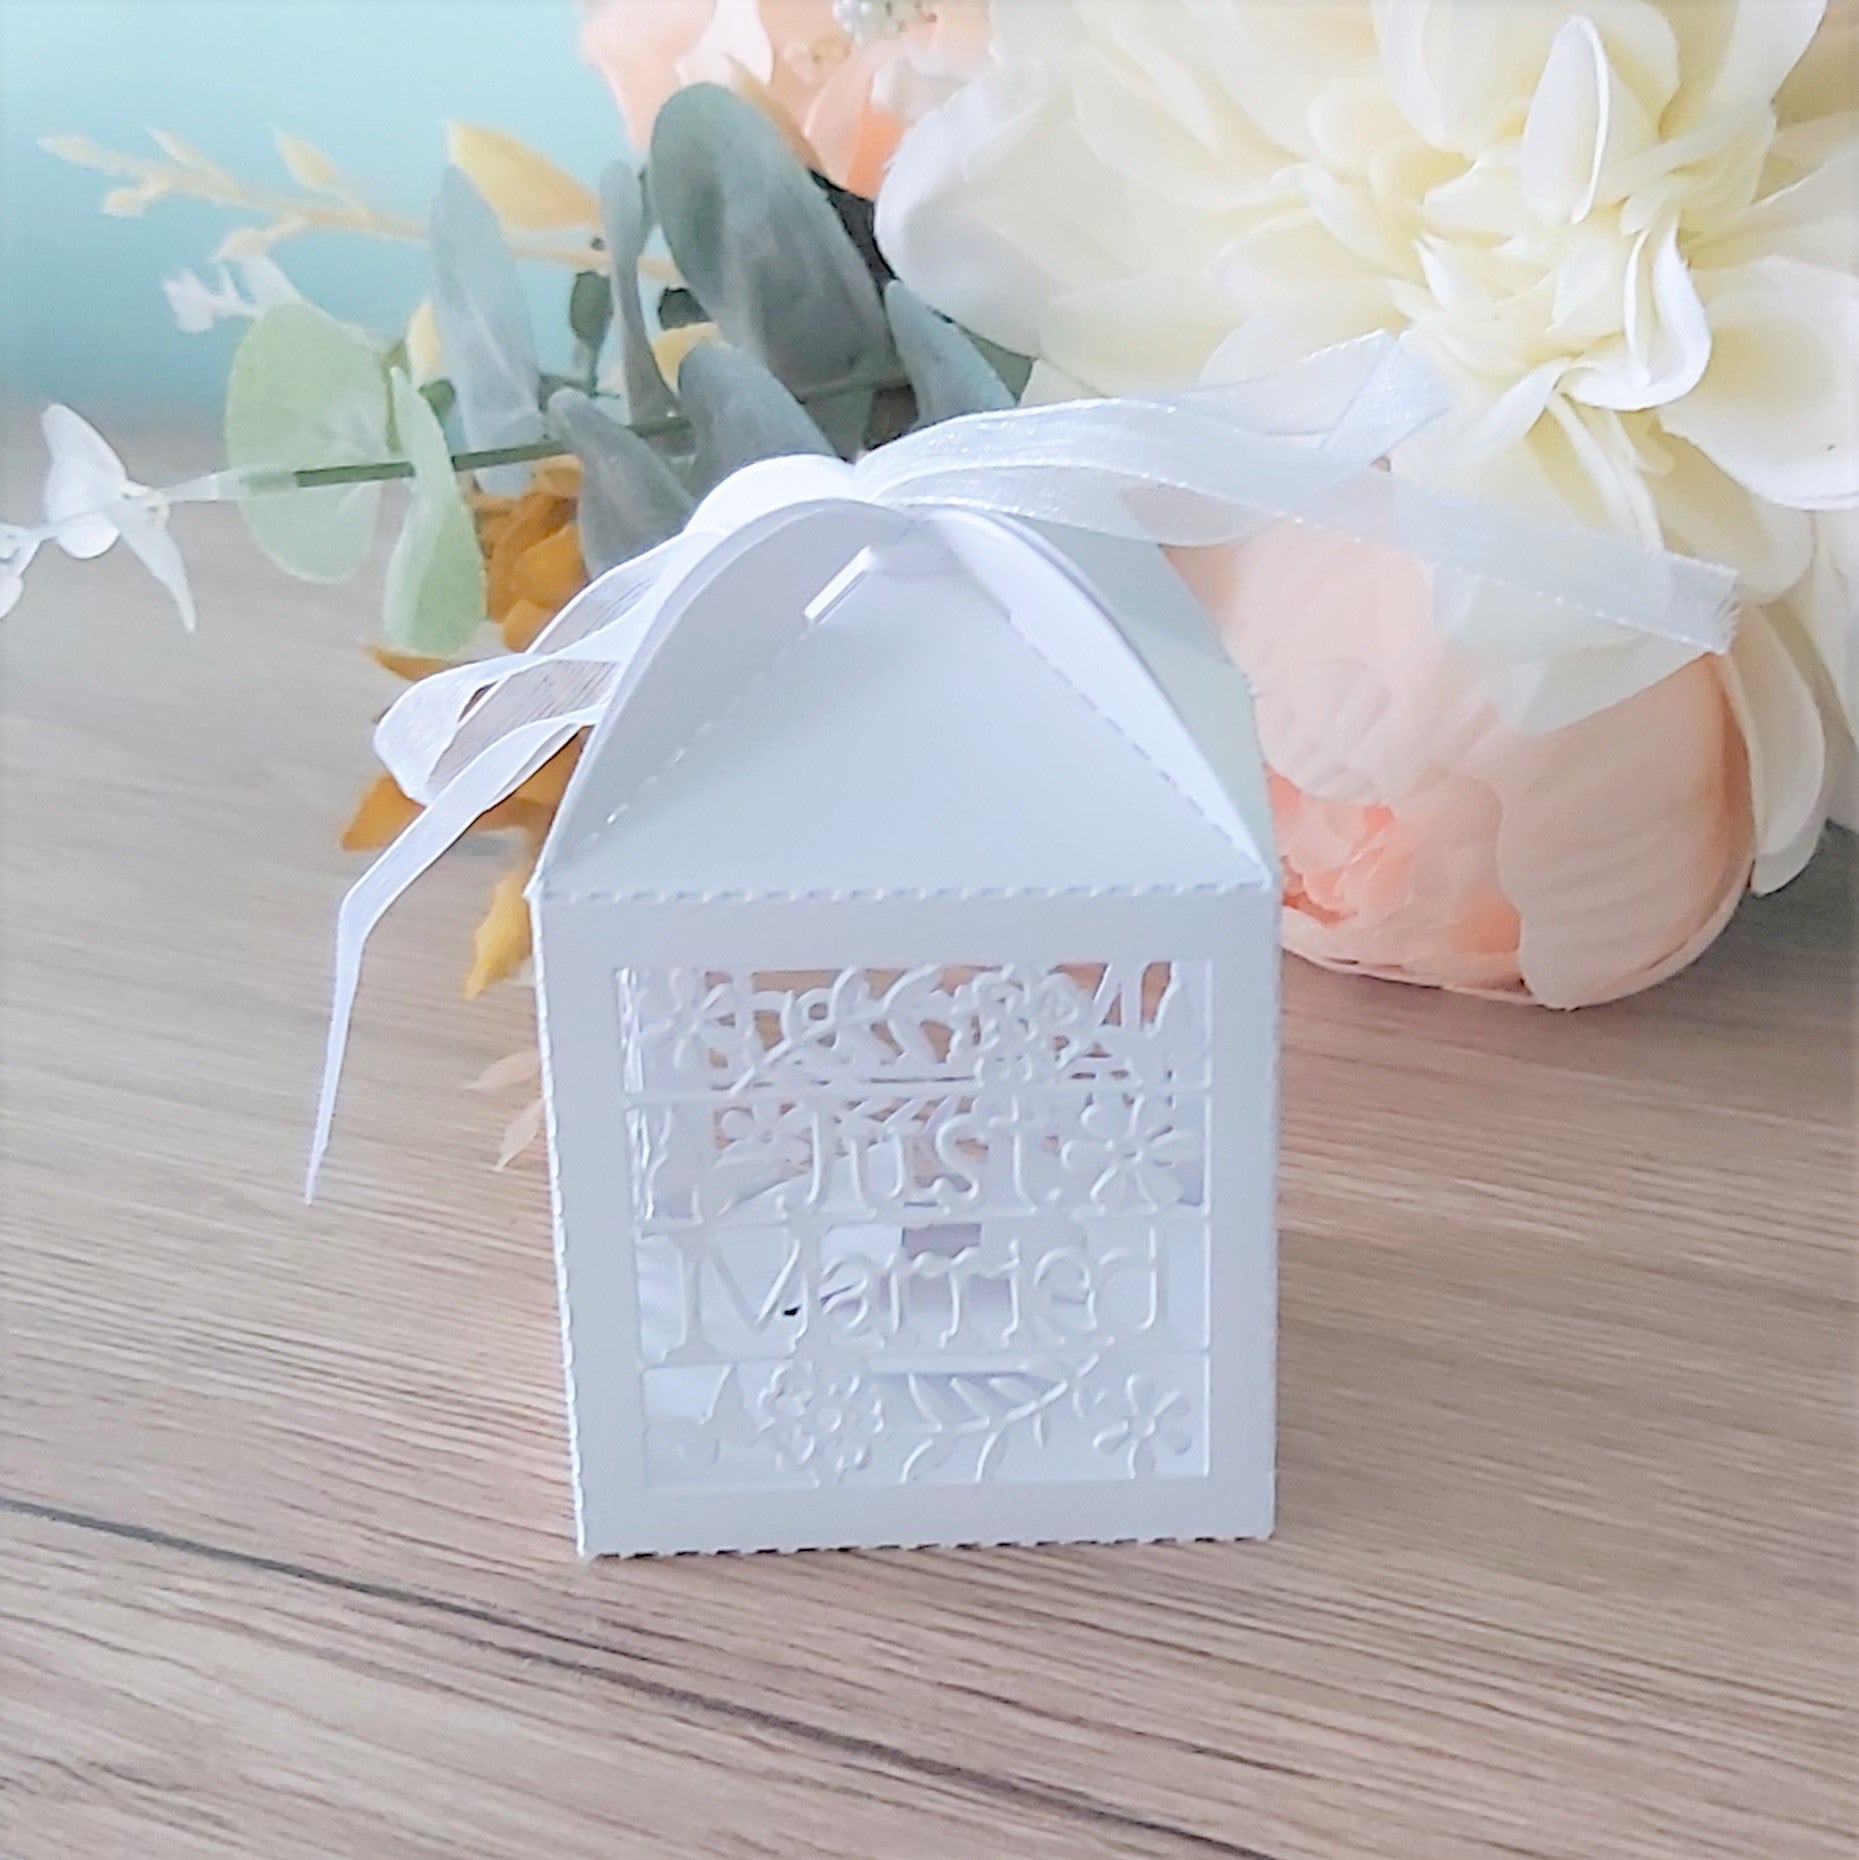 Just Married Laser Cut Box